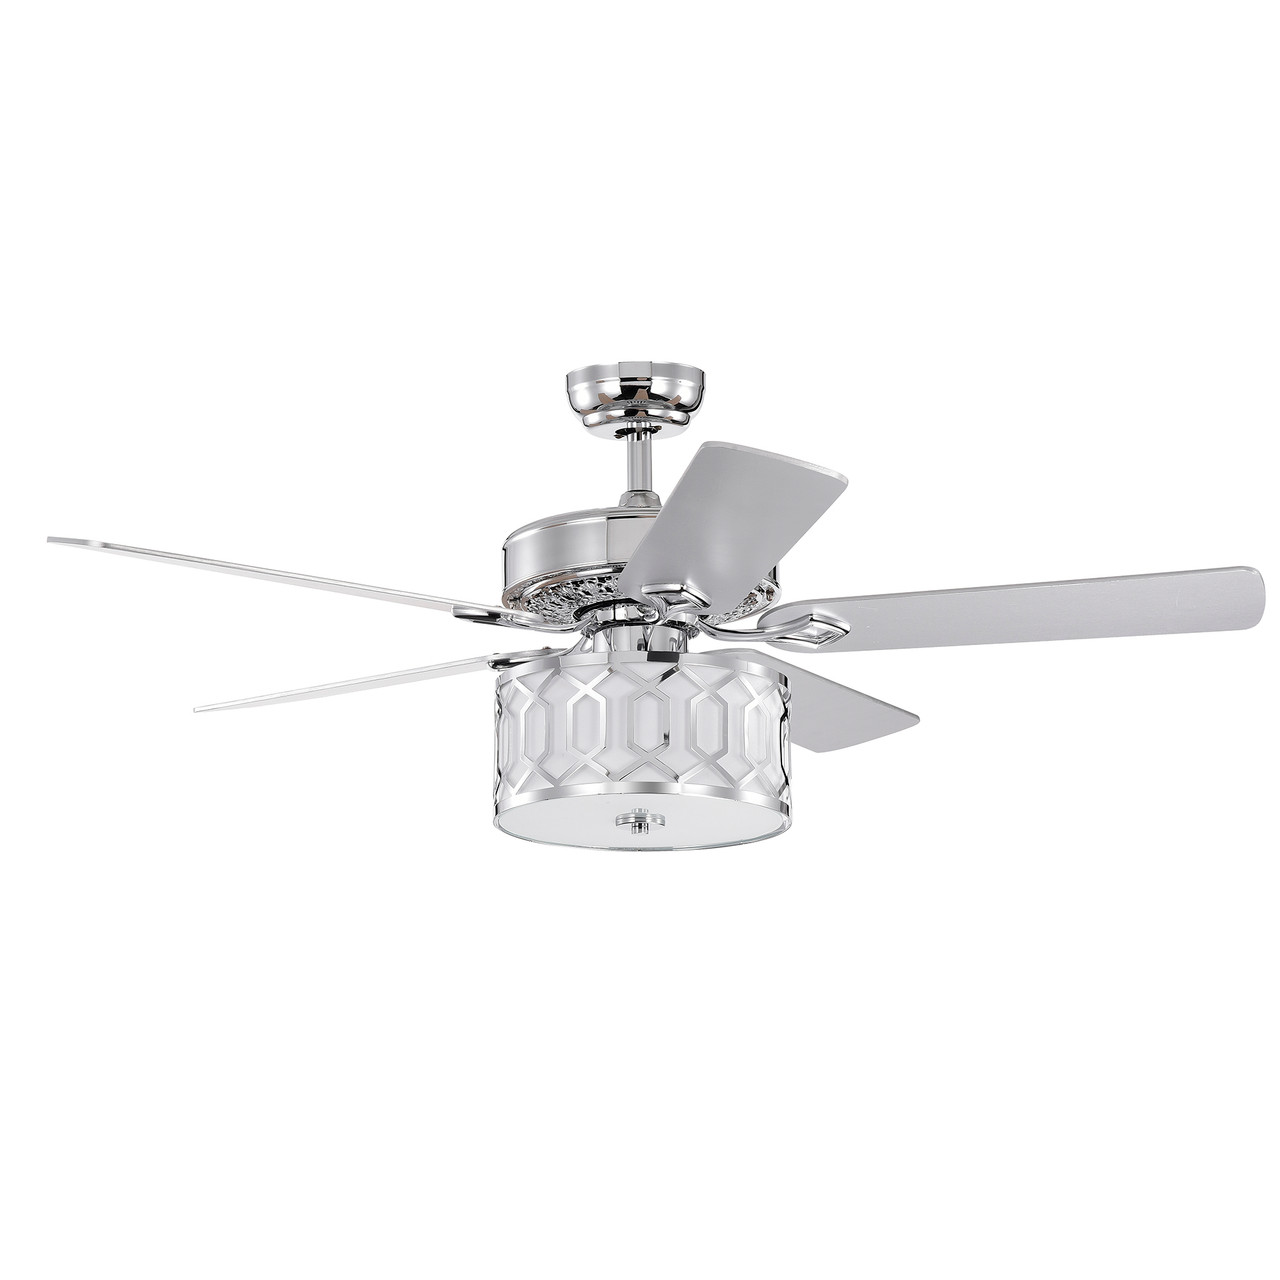 WAREHOUSE OF TIFFANY'S CFL-8484REMO/CH Manny 52 in. 3-Light Indoor Chrome Finish Remote Controlled Ceiling Fan with Light Kit